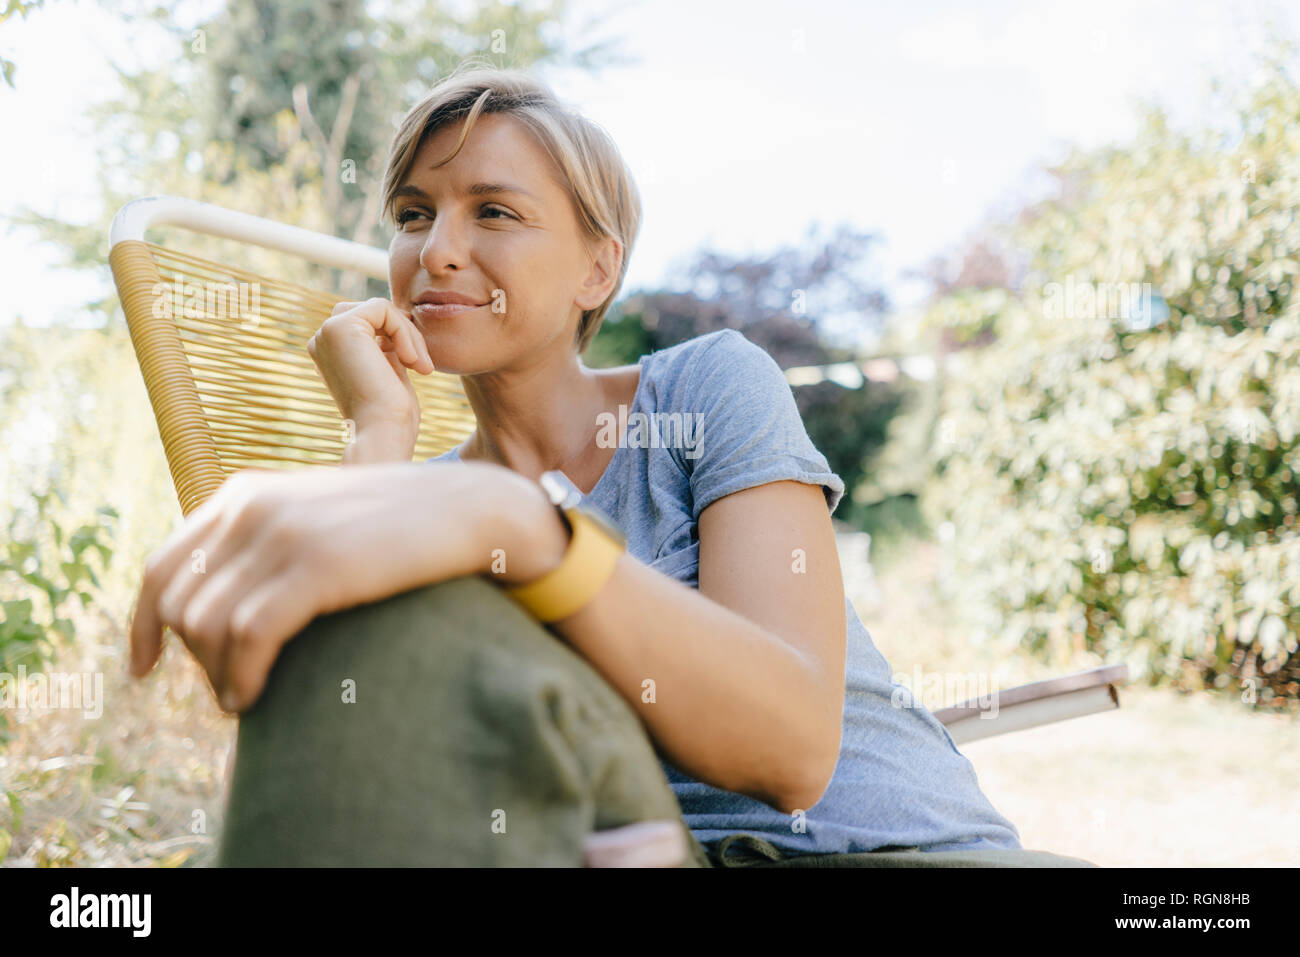 Woman sitting in garden on chair Stock Photo